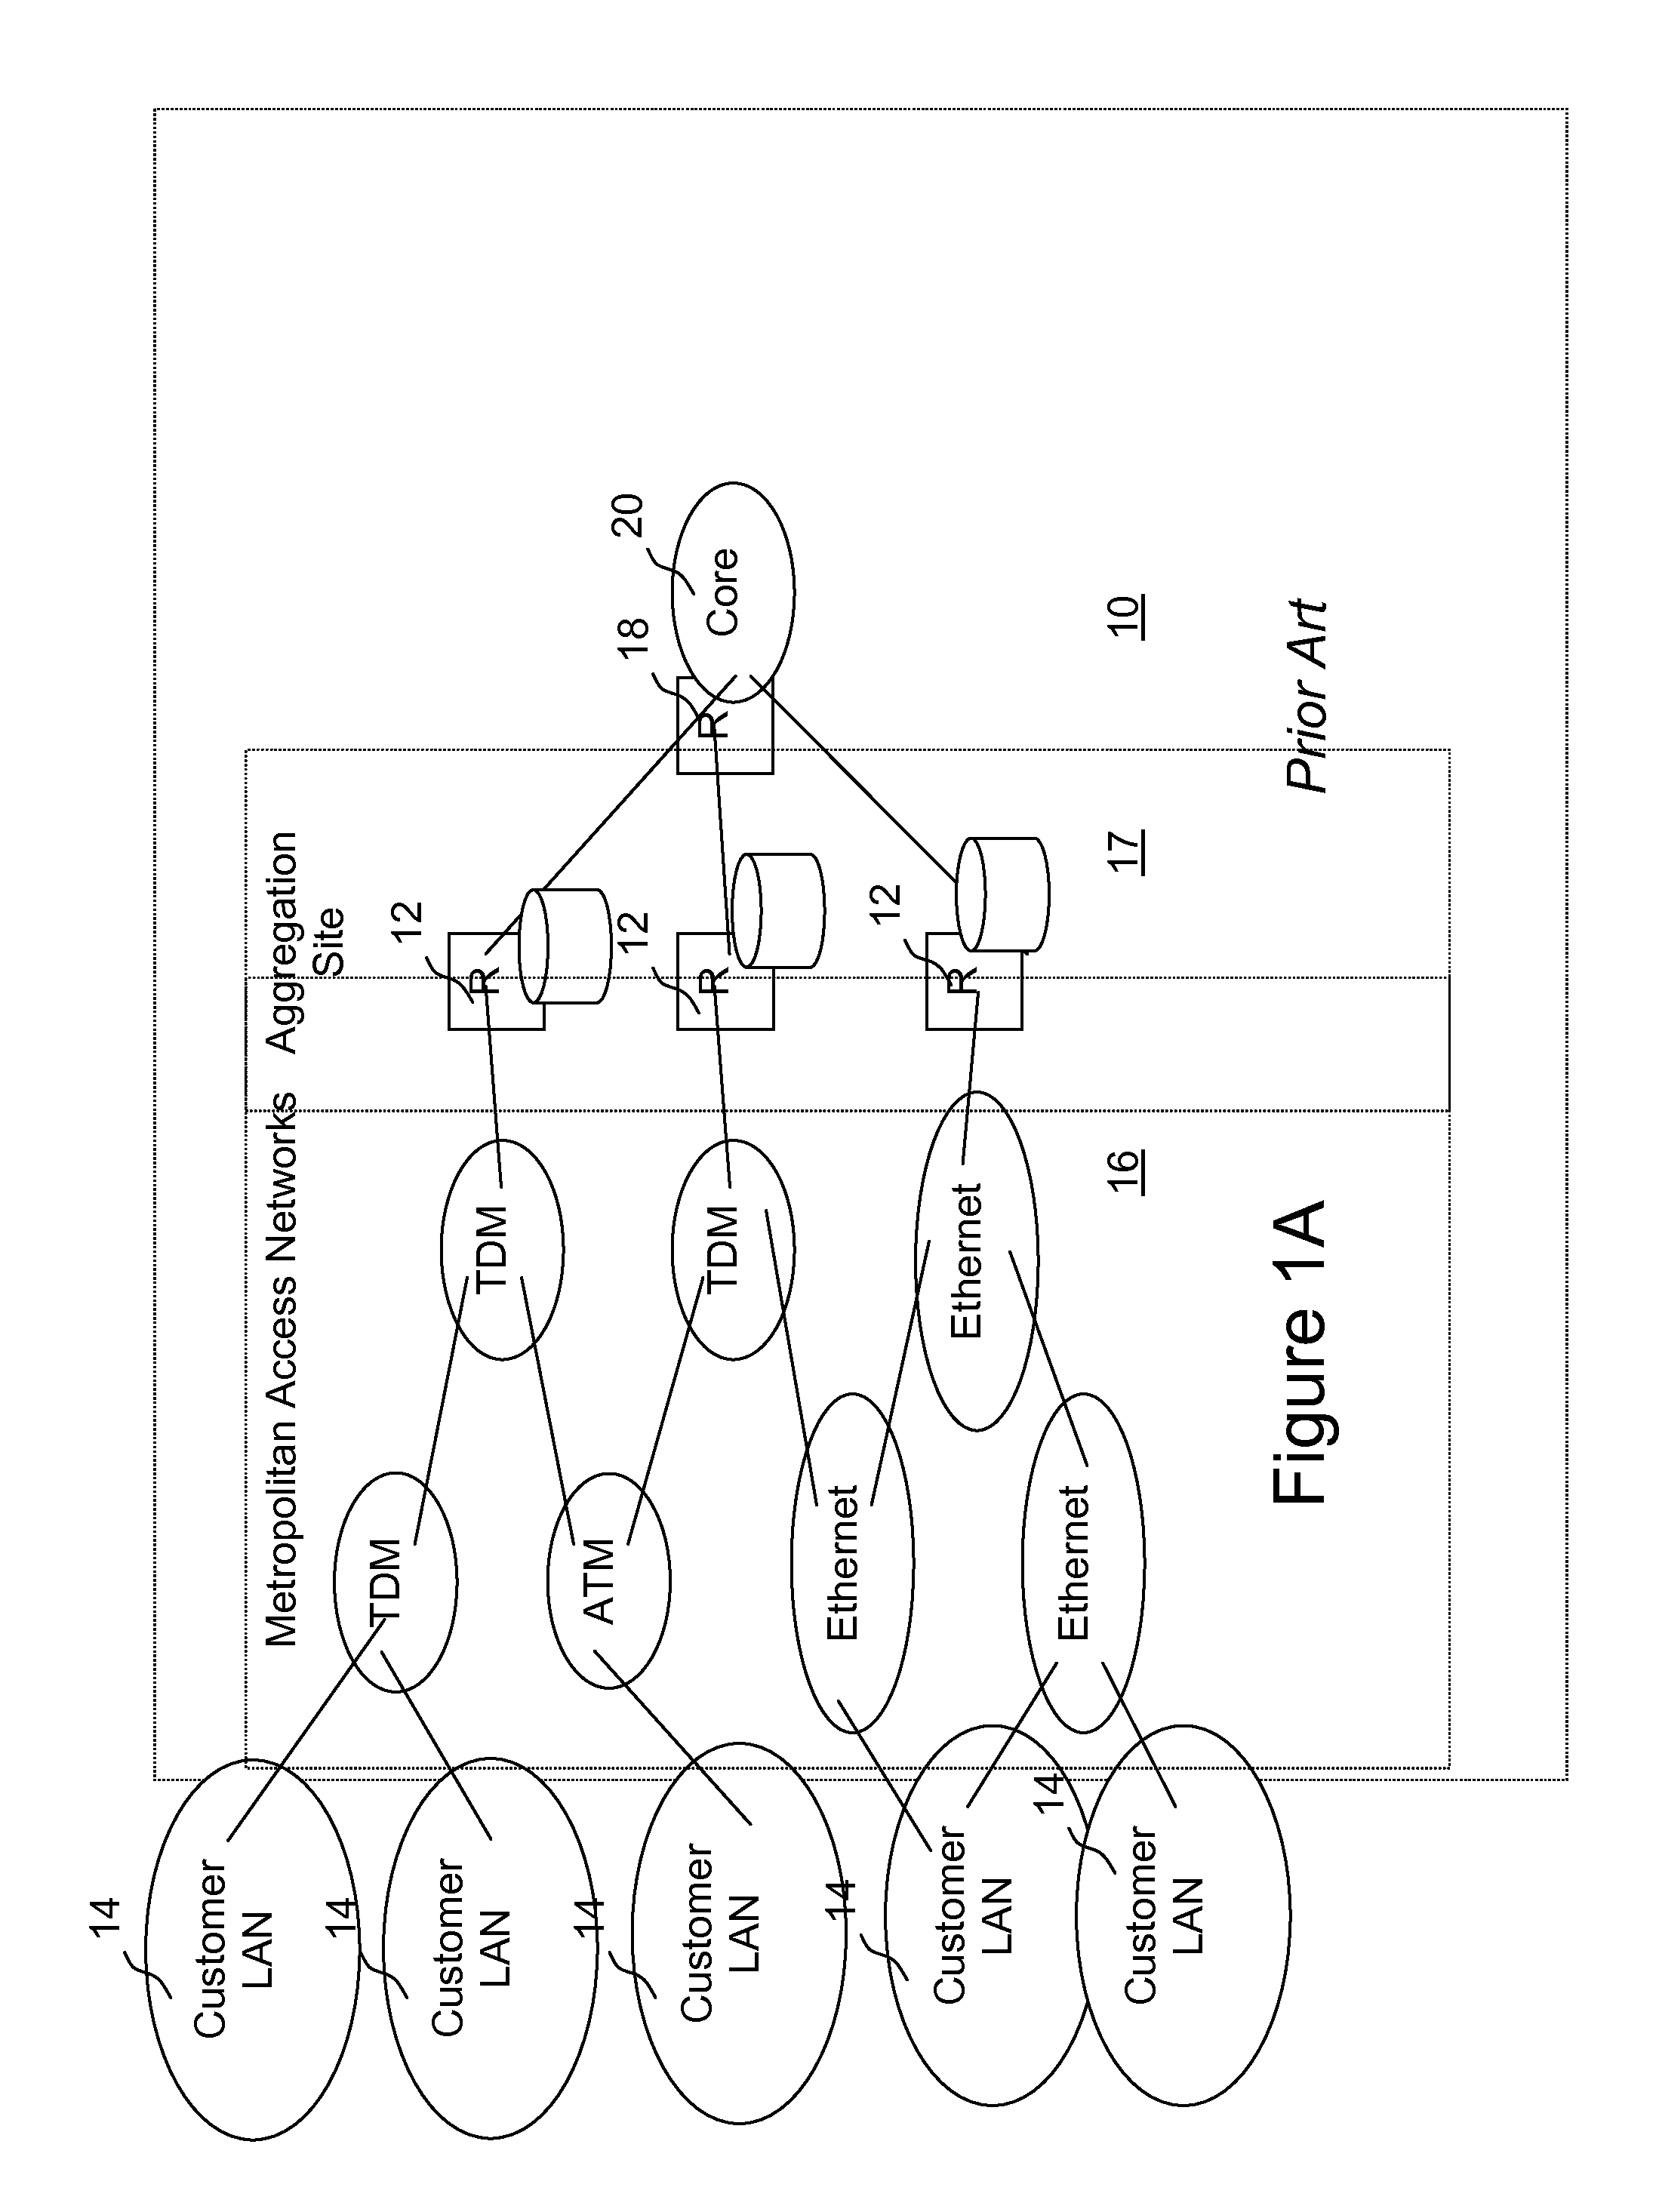 External processor for a distributed network access system